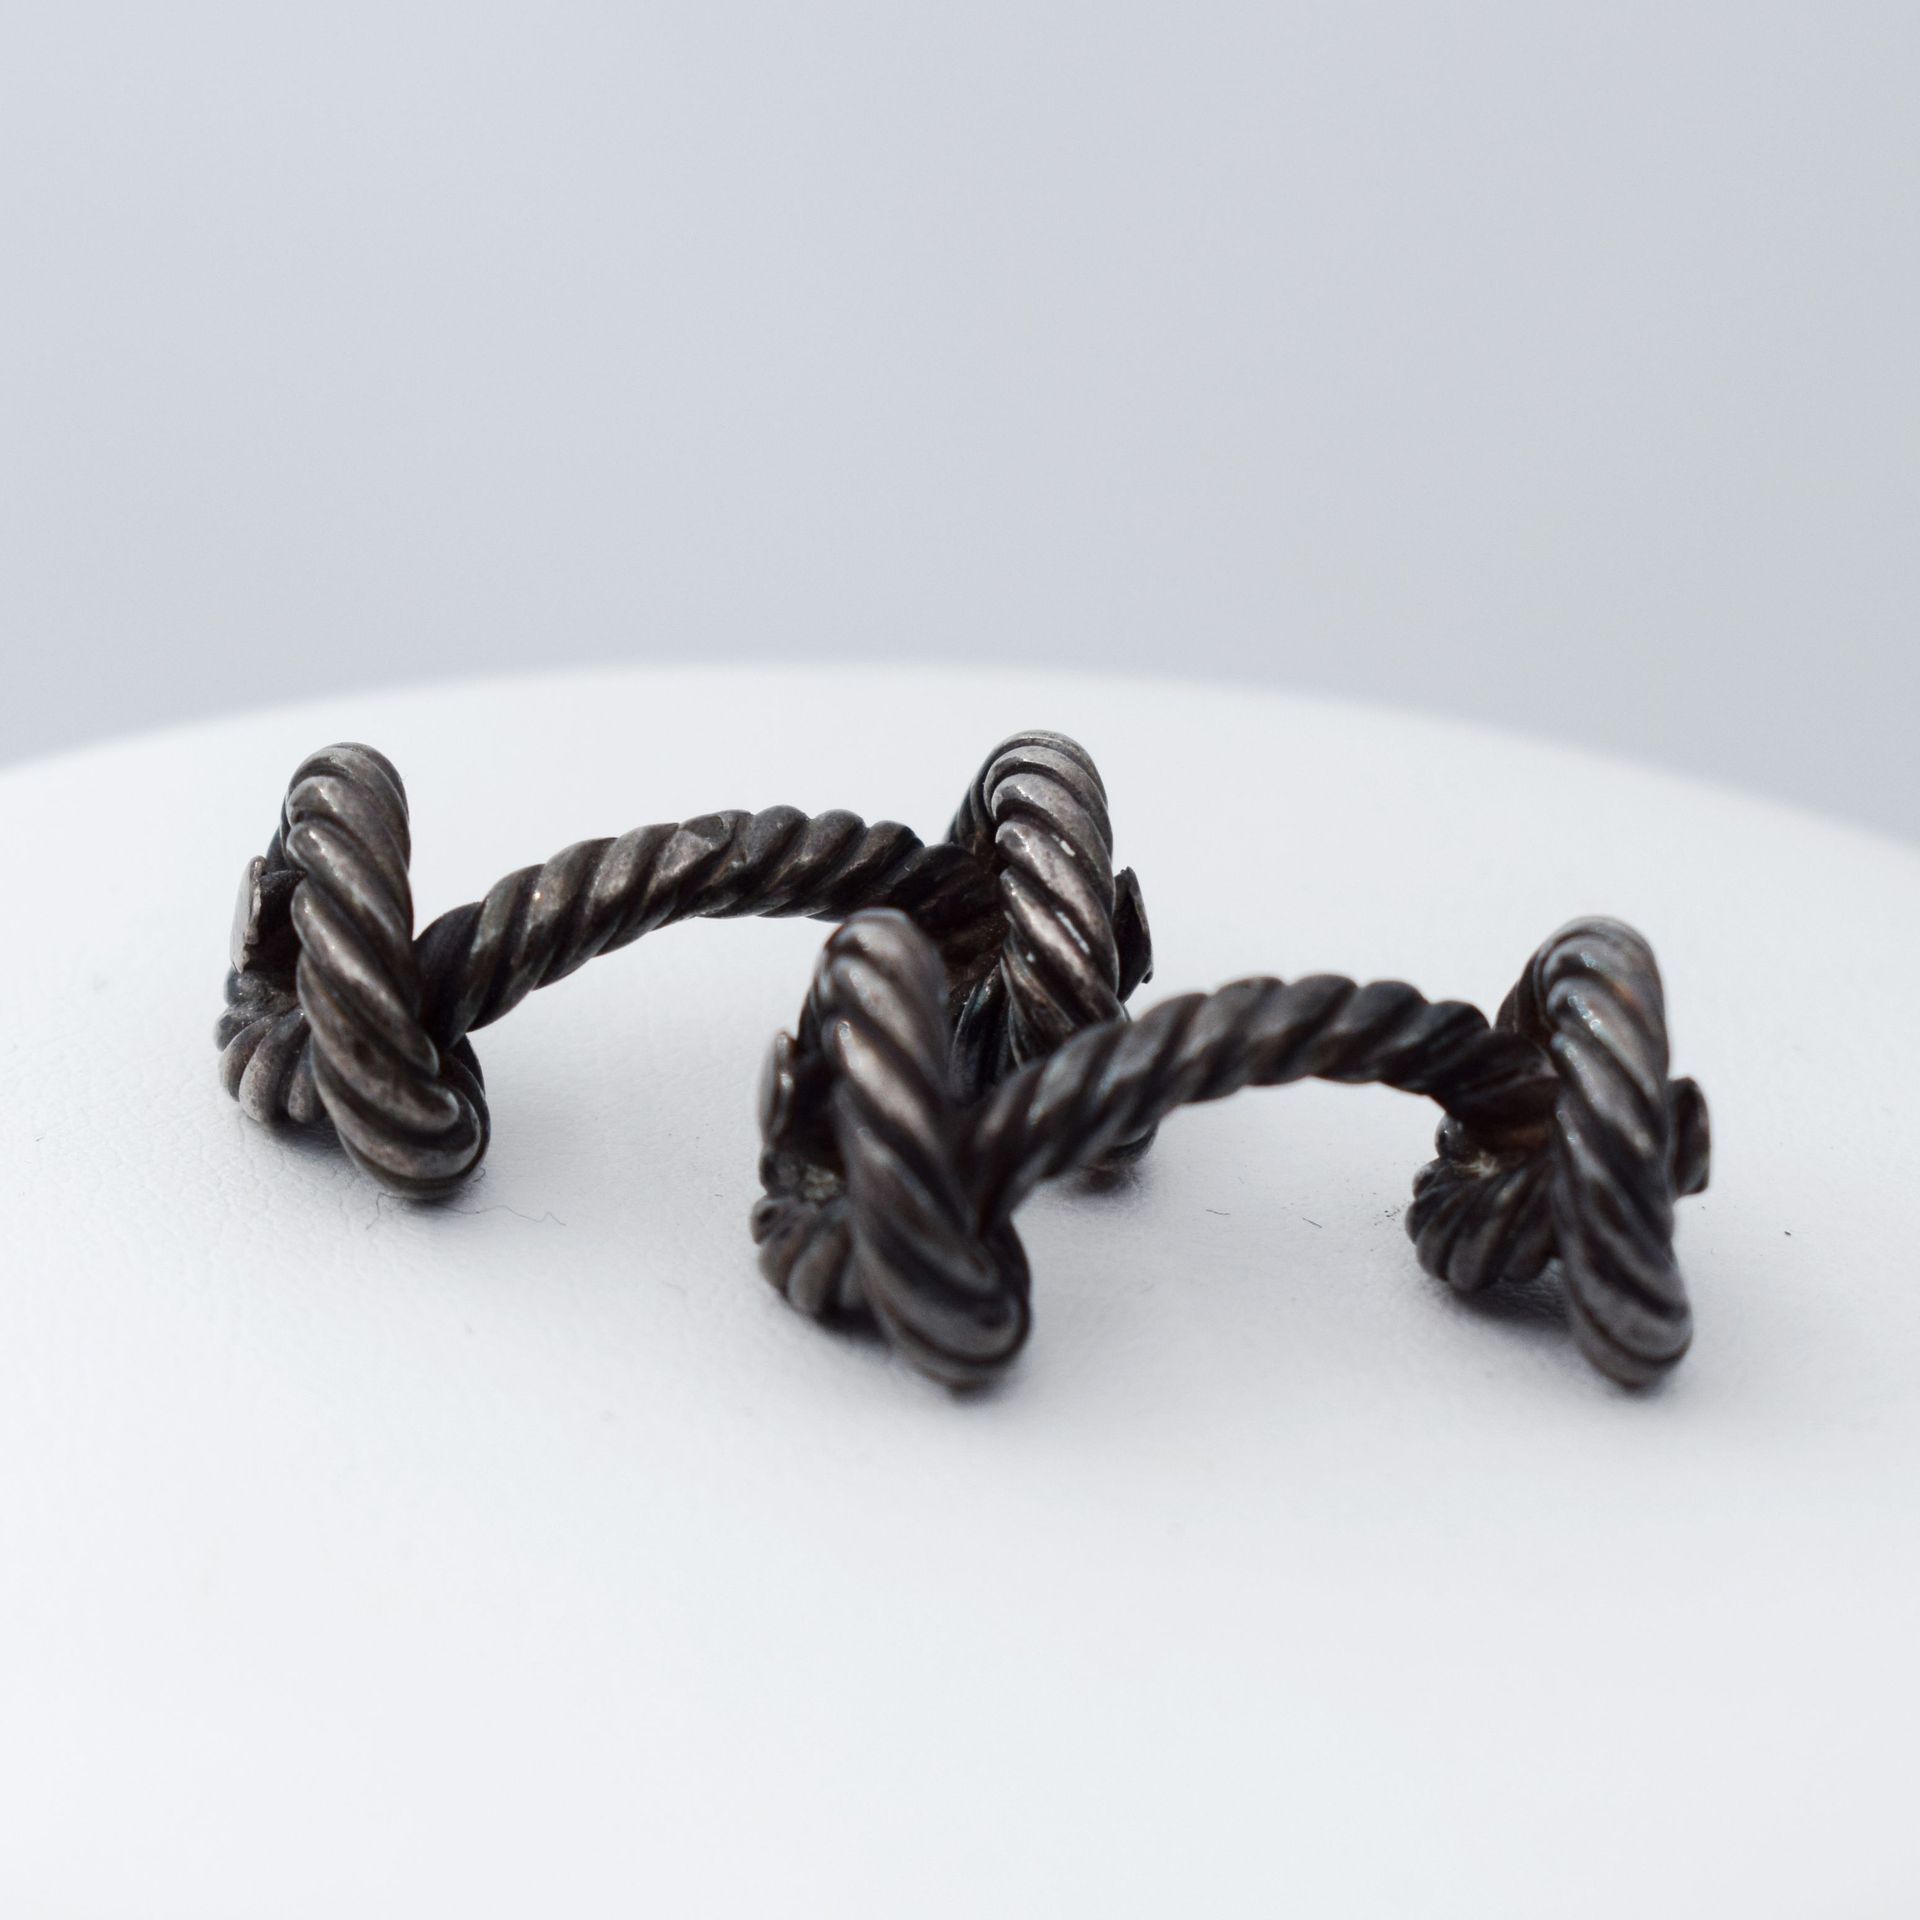 Null (HERMES) Pair of HERMES silver cufflinks with a knotted rope design